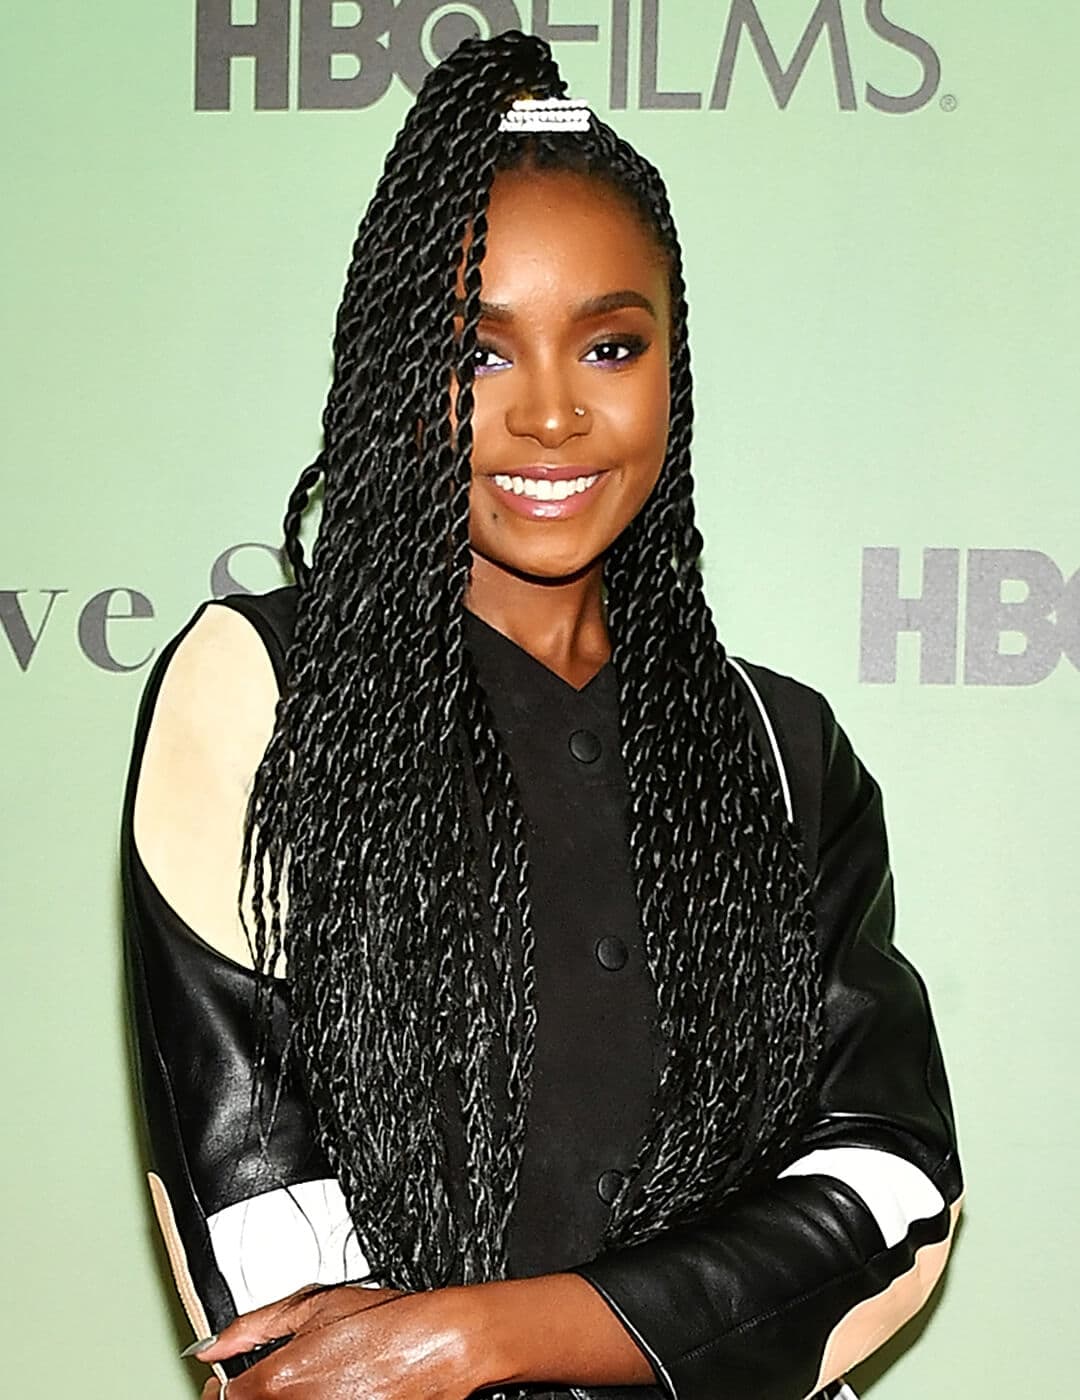 Kiki Layne rocking a high ponytail twists hairstyle, cream, white, and black leather jacket, and smoky eyeshadow makeup look paired with nude lips